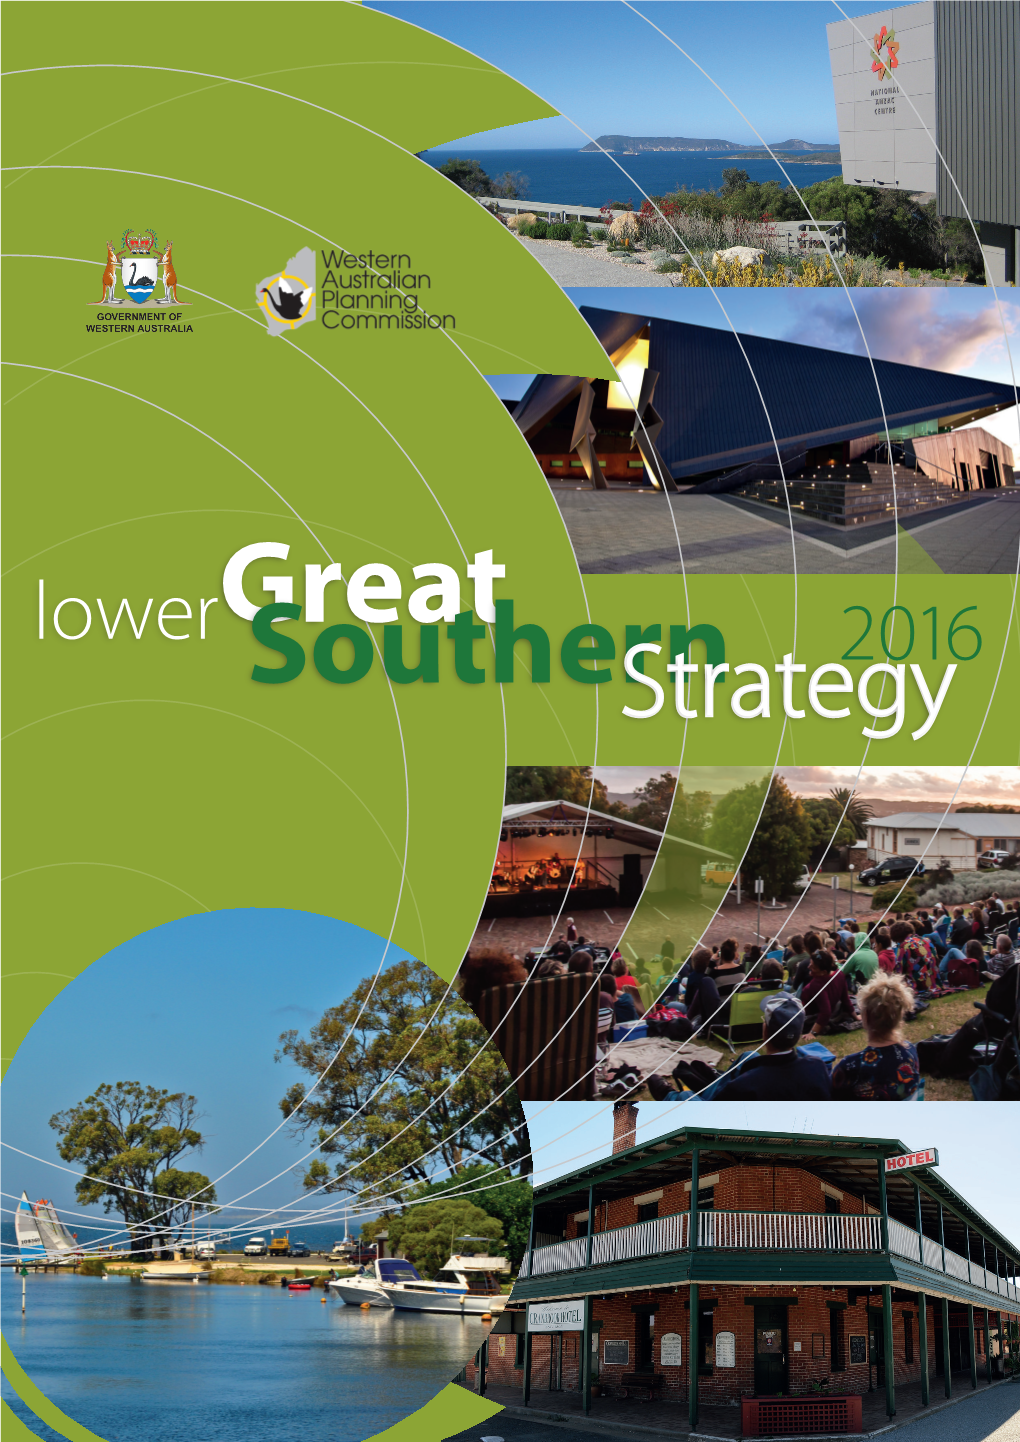 Lower Great Southern Strategy 2016